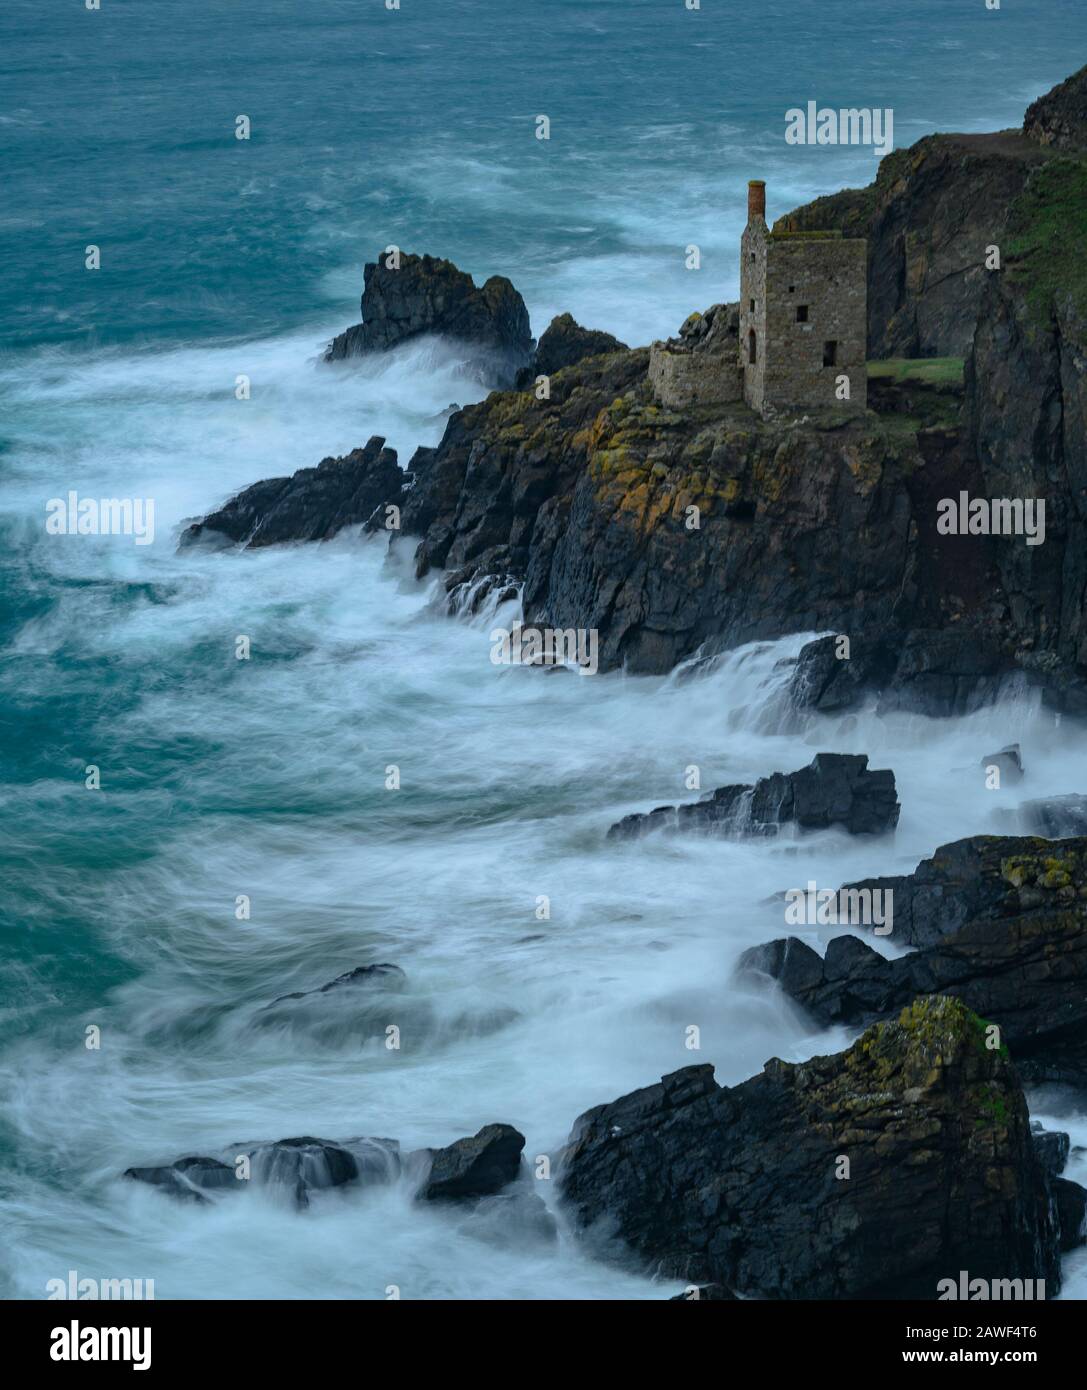 Botallack Mines, Cornwall, 8th February 2020. UK Weather: High winds hit the Cornish coastline bringing Atlantic waves crashing into the rocks at Botallak Mines near St Just, Cornwall on Saturday afternoon ahead of Storm Ciara. Severe weather warnings have been issued with 80 mph winds and heavy rain forecast when the full impact of the storm hits the UK tomorrow. Warnings of widespread travel disruption have been issued. Credit: Celia McMahon/Alamy Live News Stock Photo